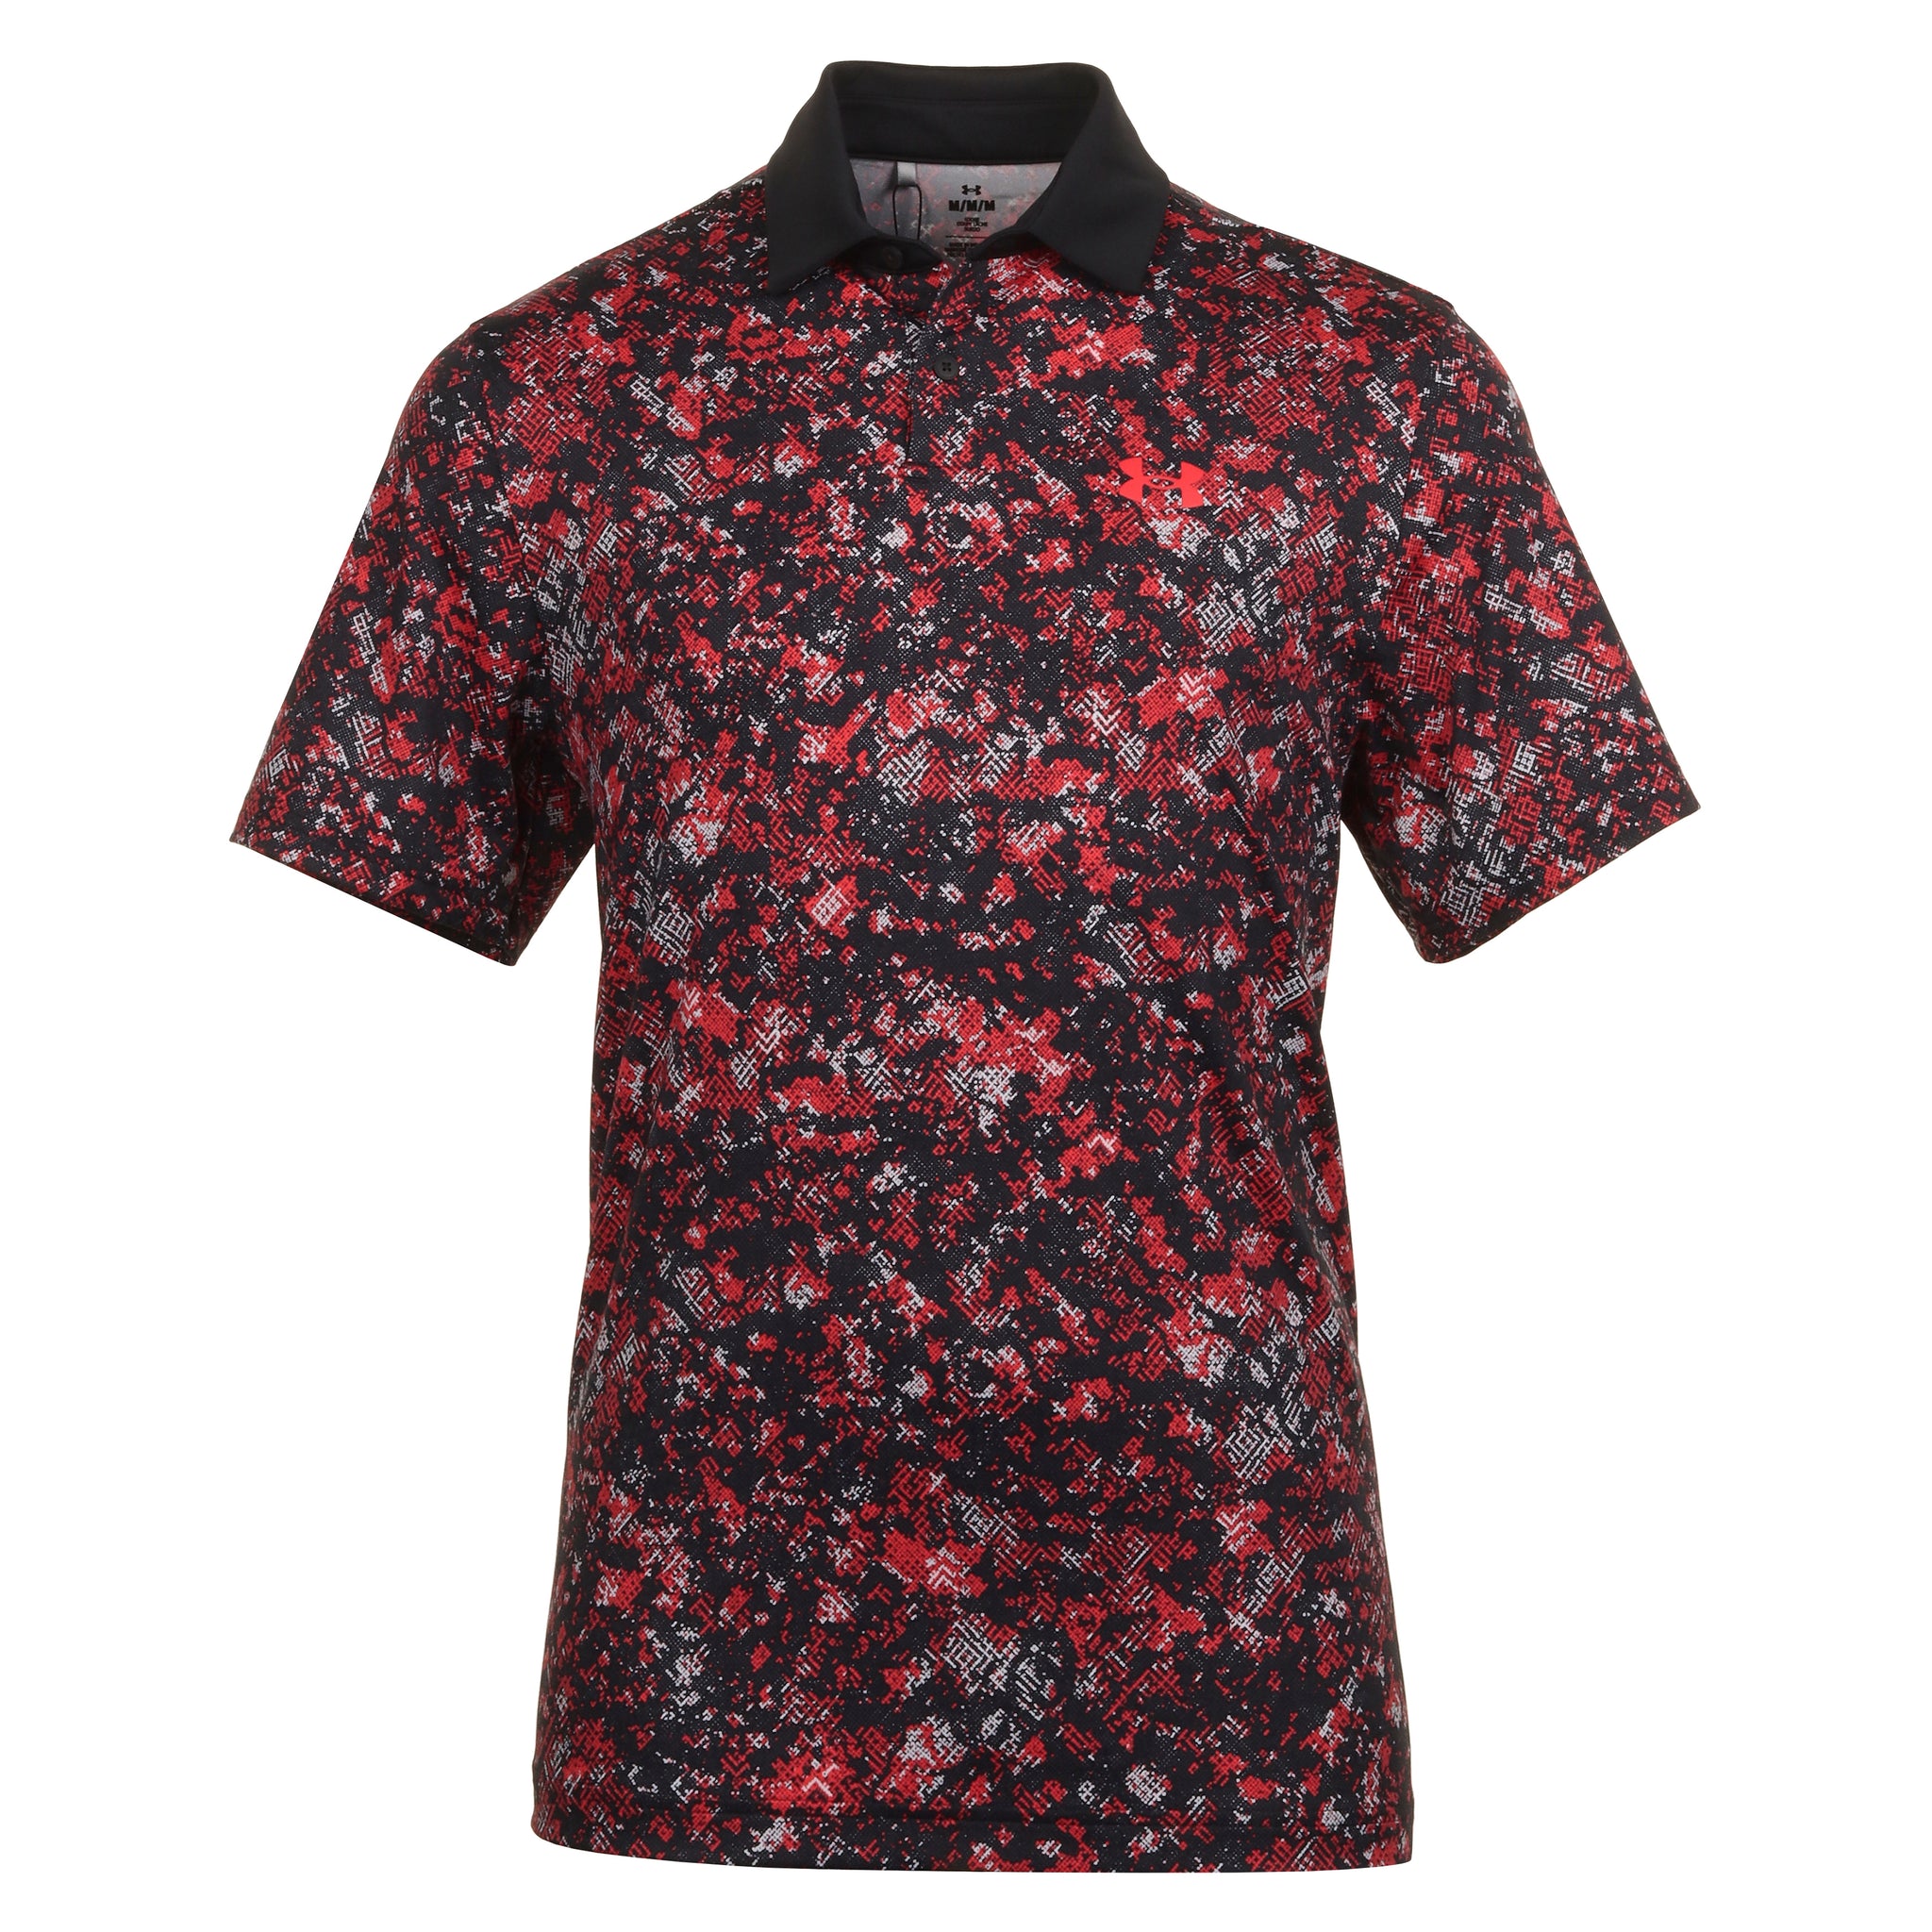 under-armour-golf-t2g-printed-shirt-1383715-black-red-solstice-002